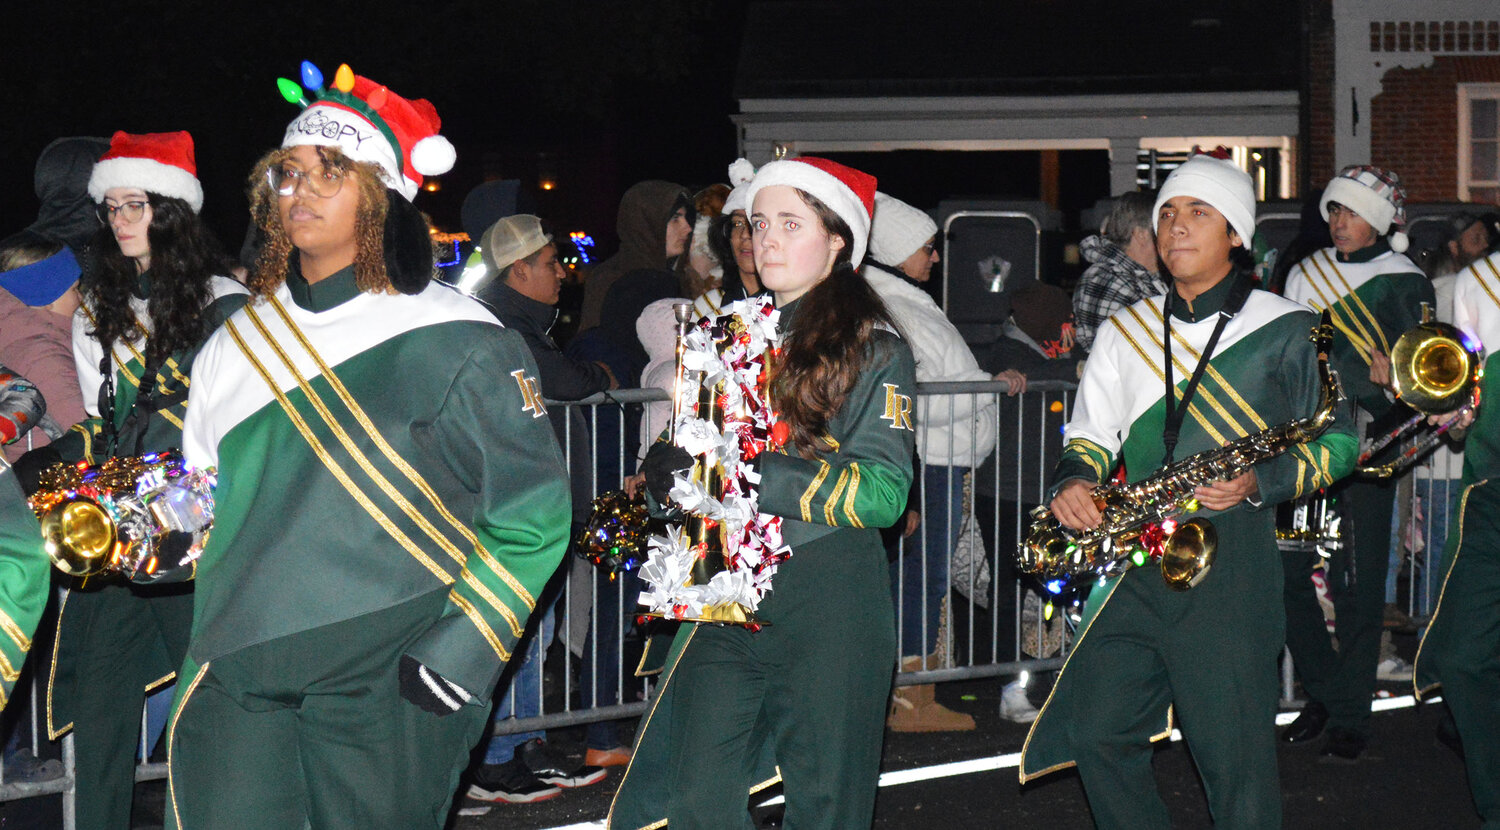 The Indian River High School marching band was among several that participated in the Georgetown Christmas Parade on Thursday.